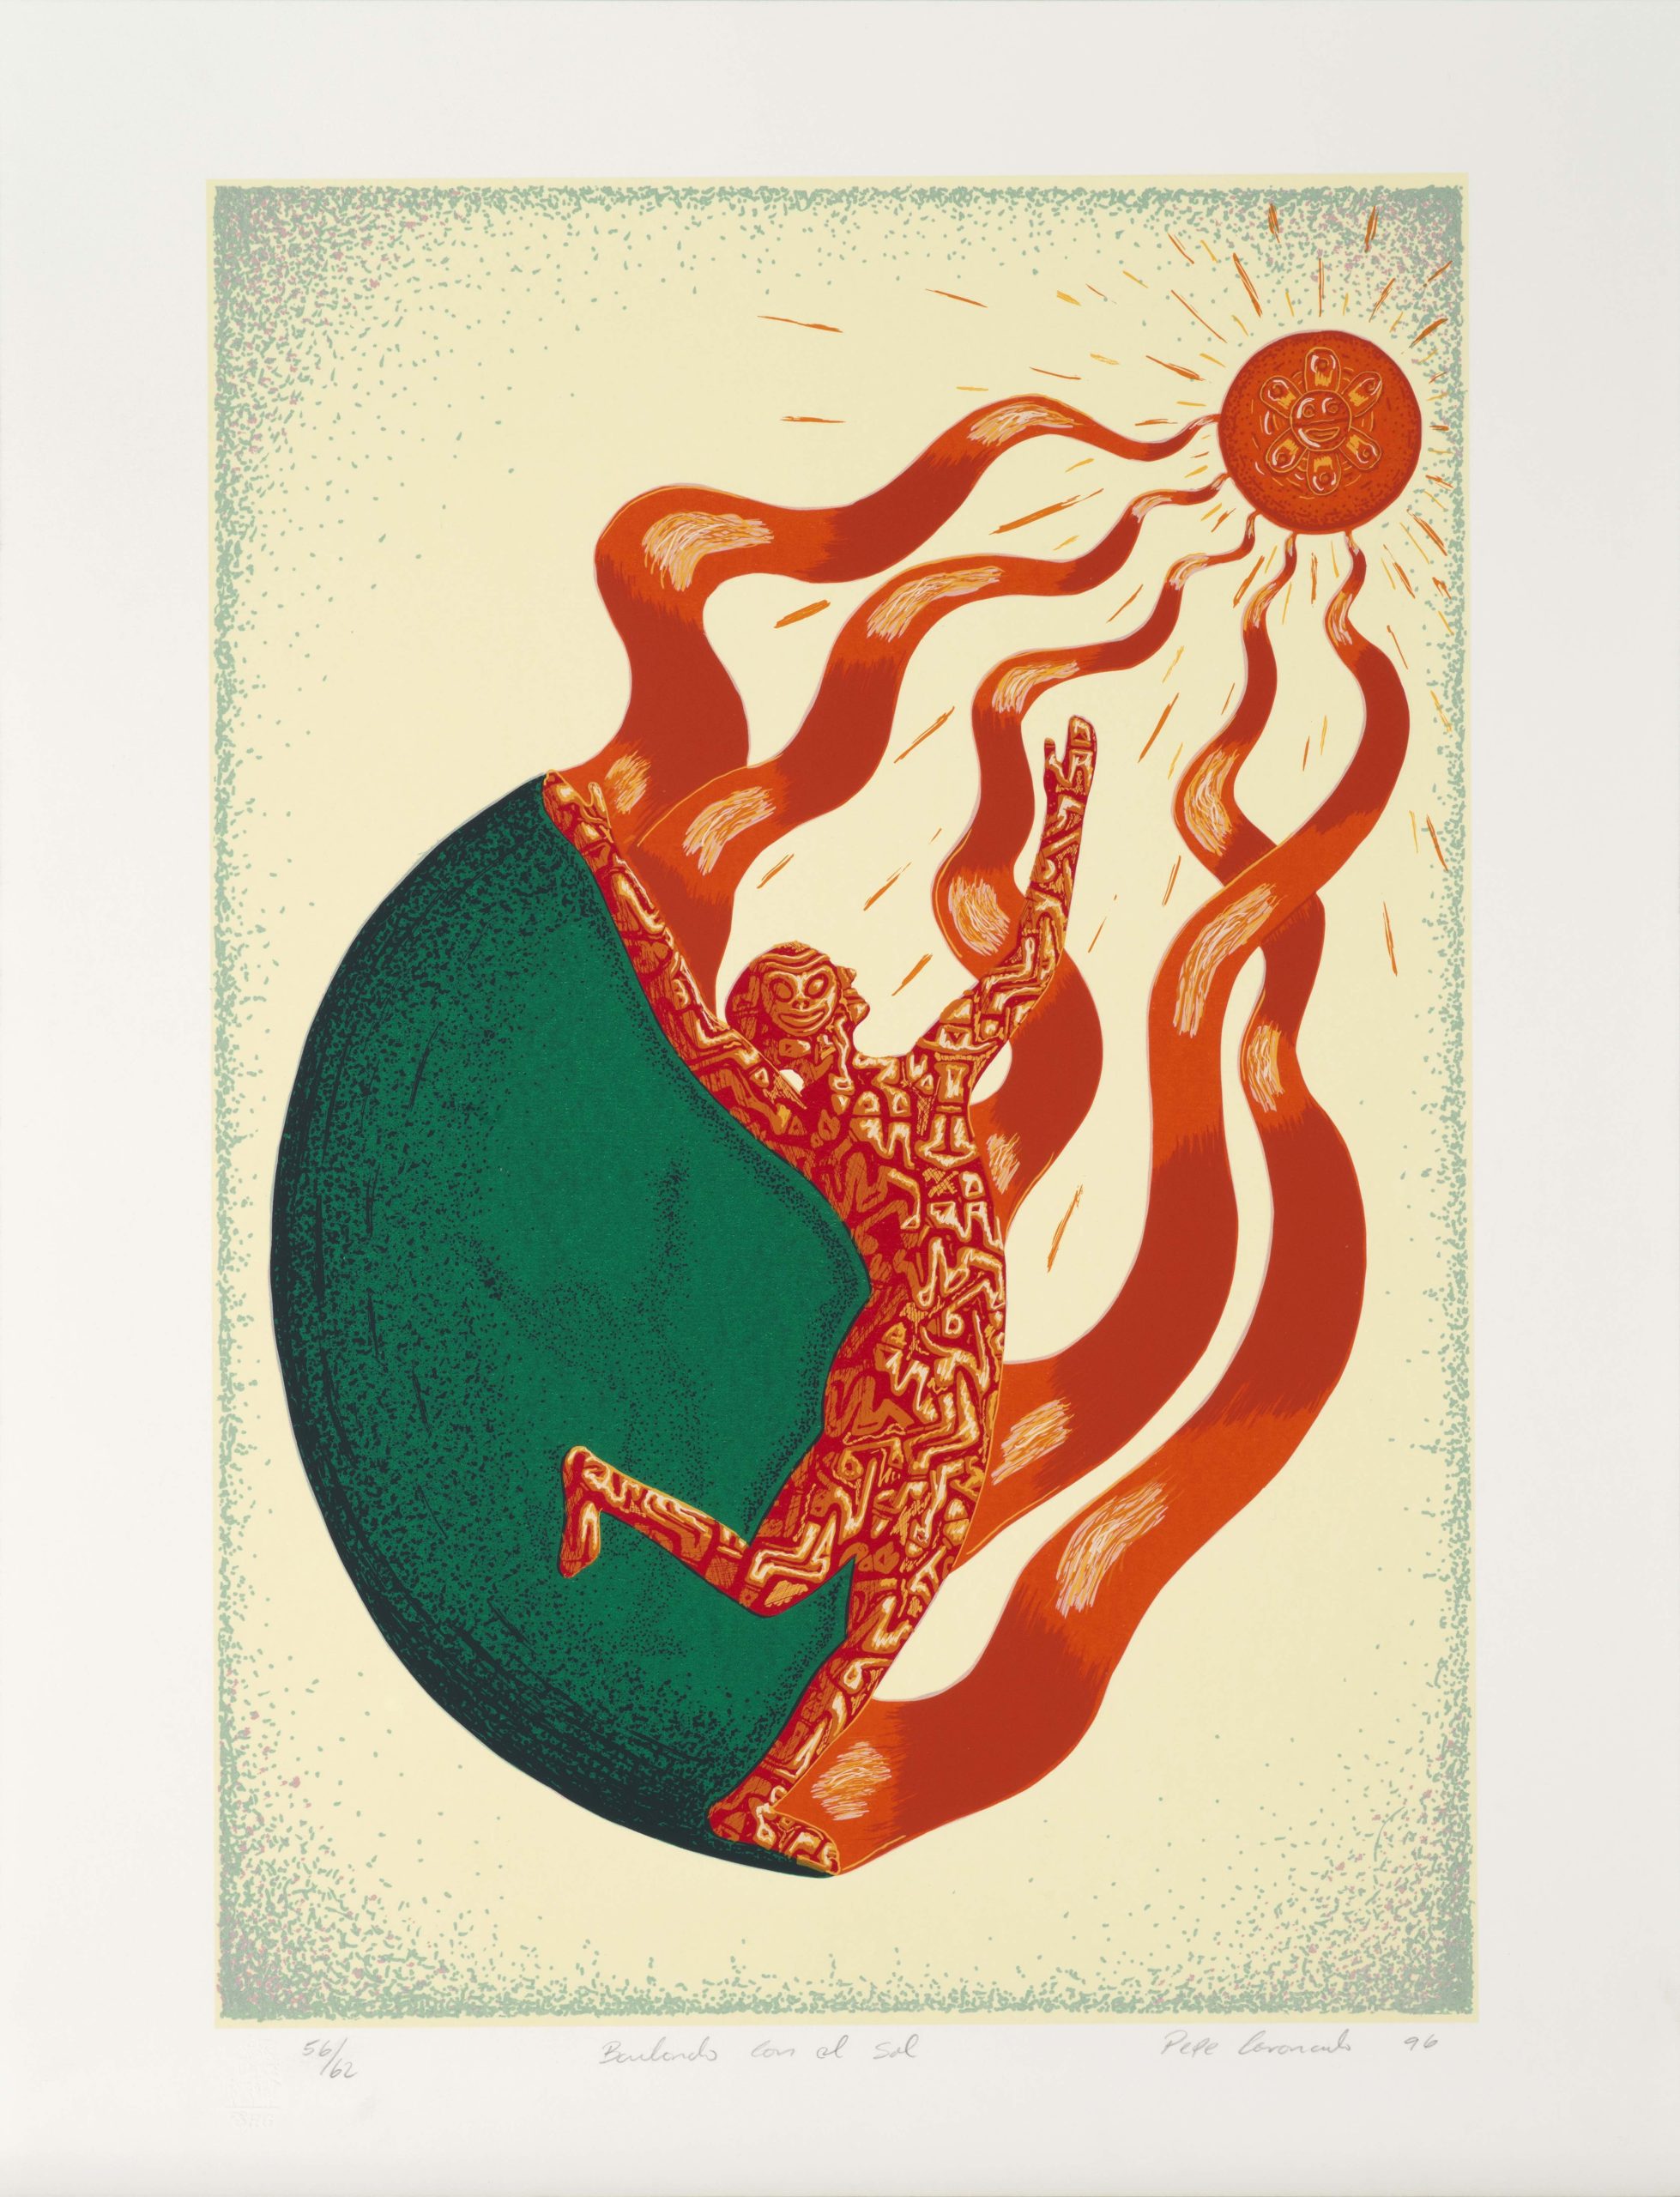 A print of a human figure coming out from a green sphere, with abstract figures within its body. It emits large flames that connect to the sun which is high above it